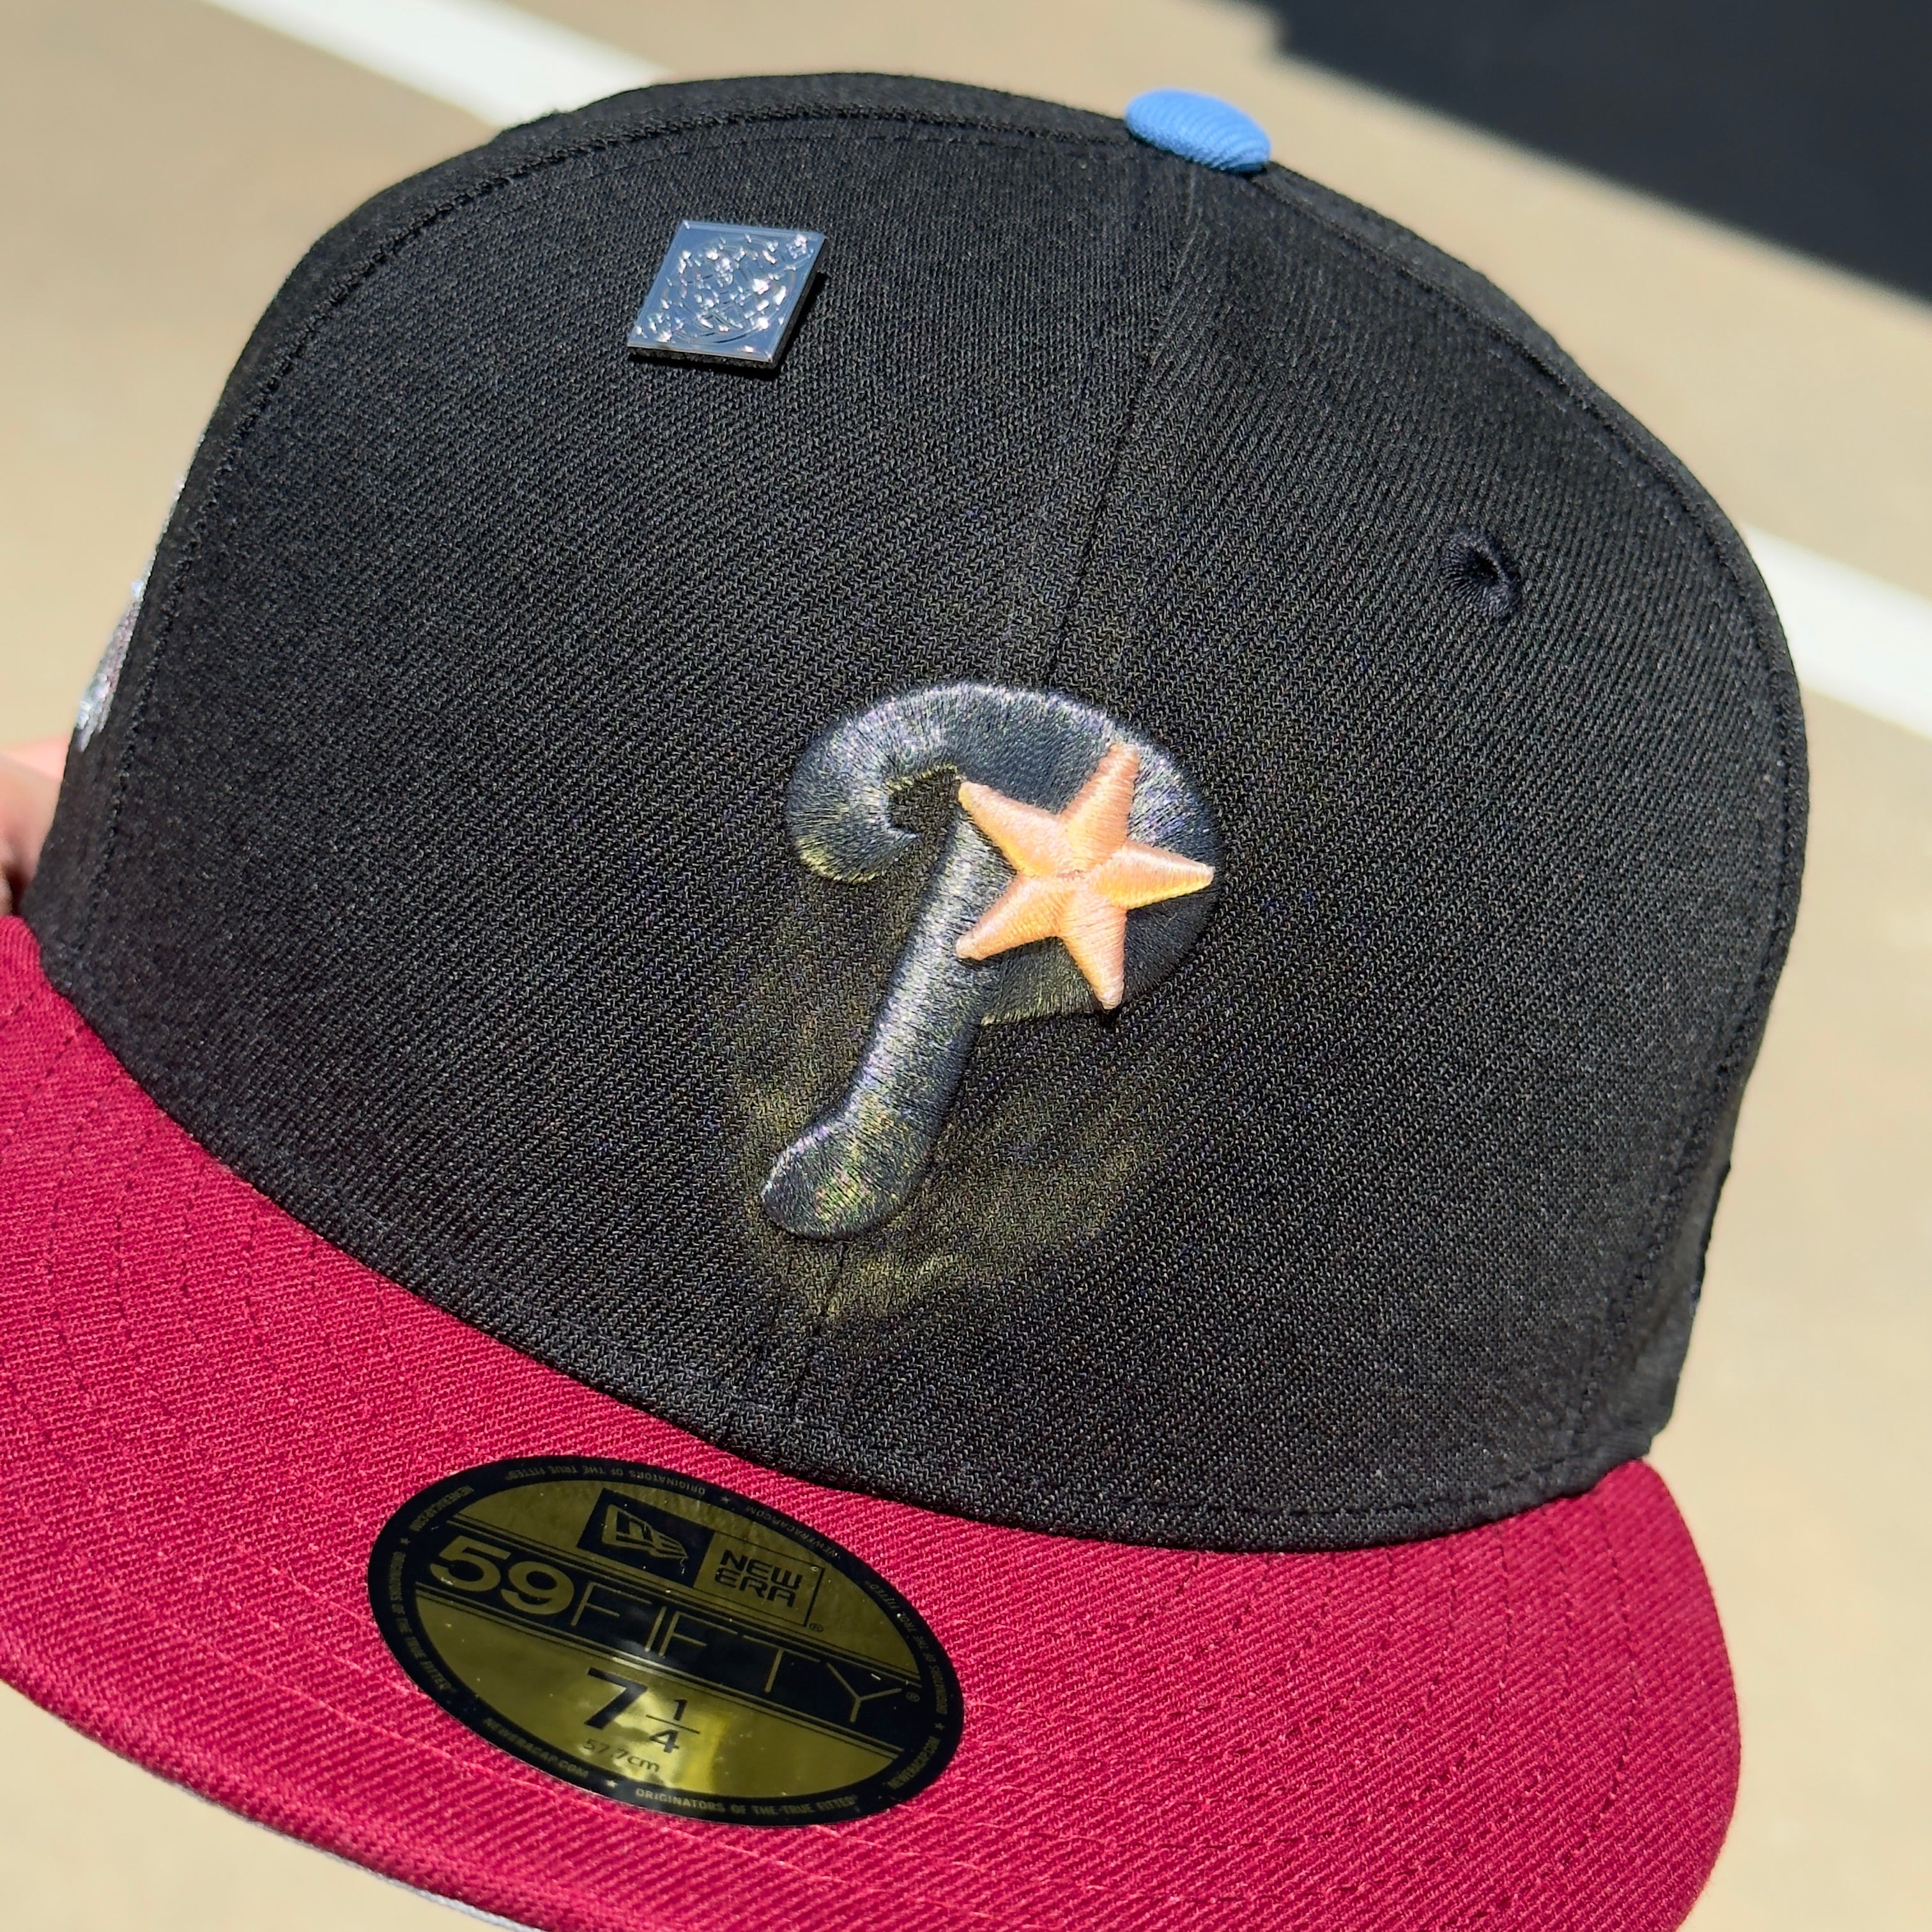 NEW Black Phillidelphia Phillies All Star Game 1995 Capsule 59fifty New Era Fitted Hat Cap